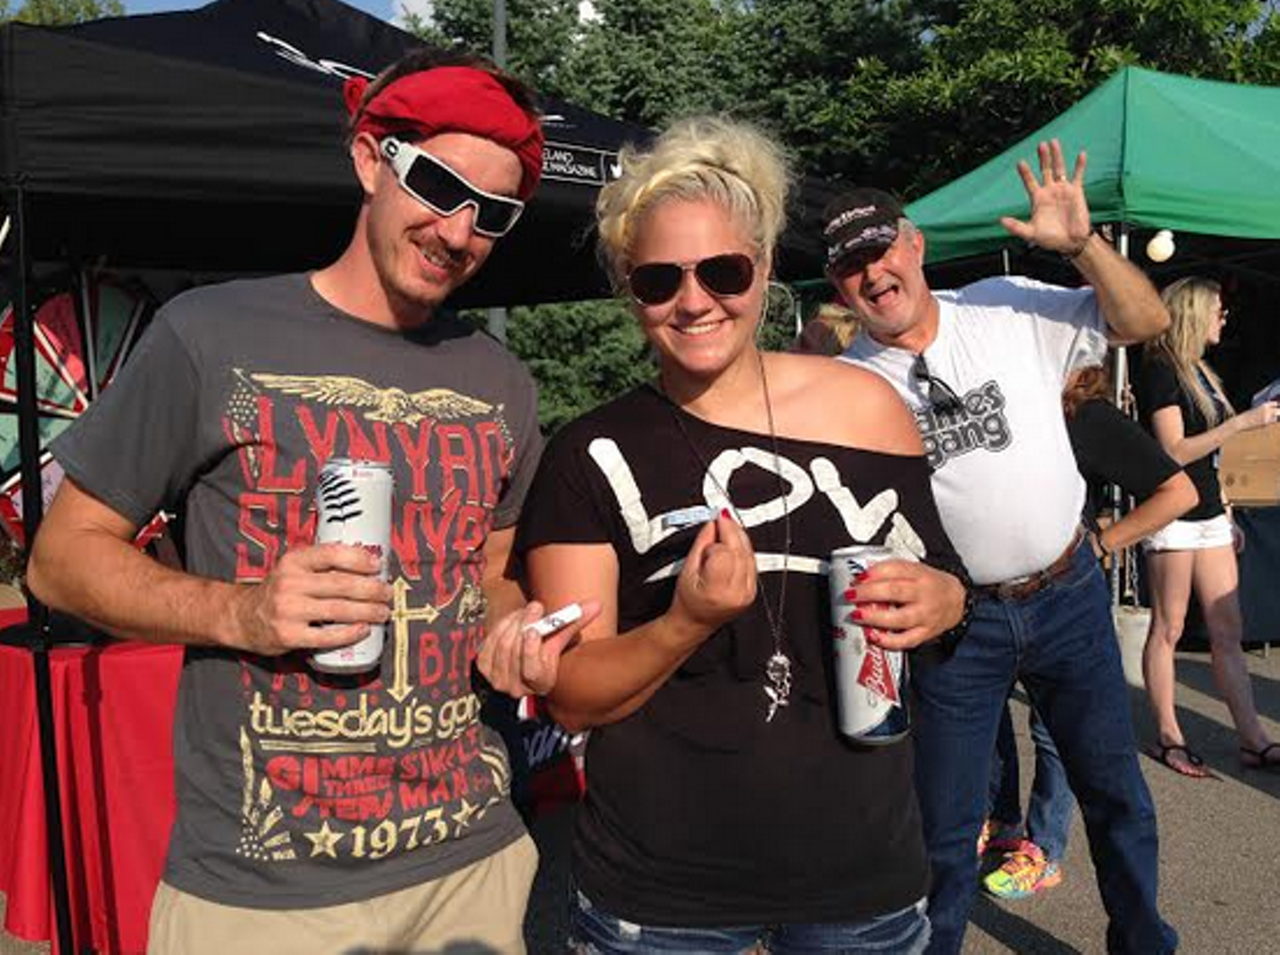 15 Photos of the Scene Events Team Driven by Fiat of Strongsville at Lynyrd Skynyrd